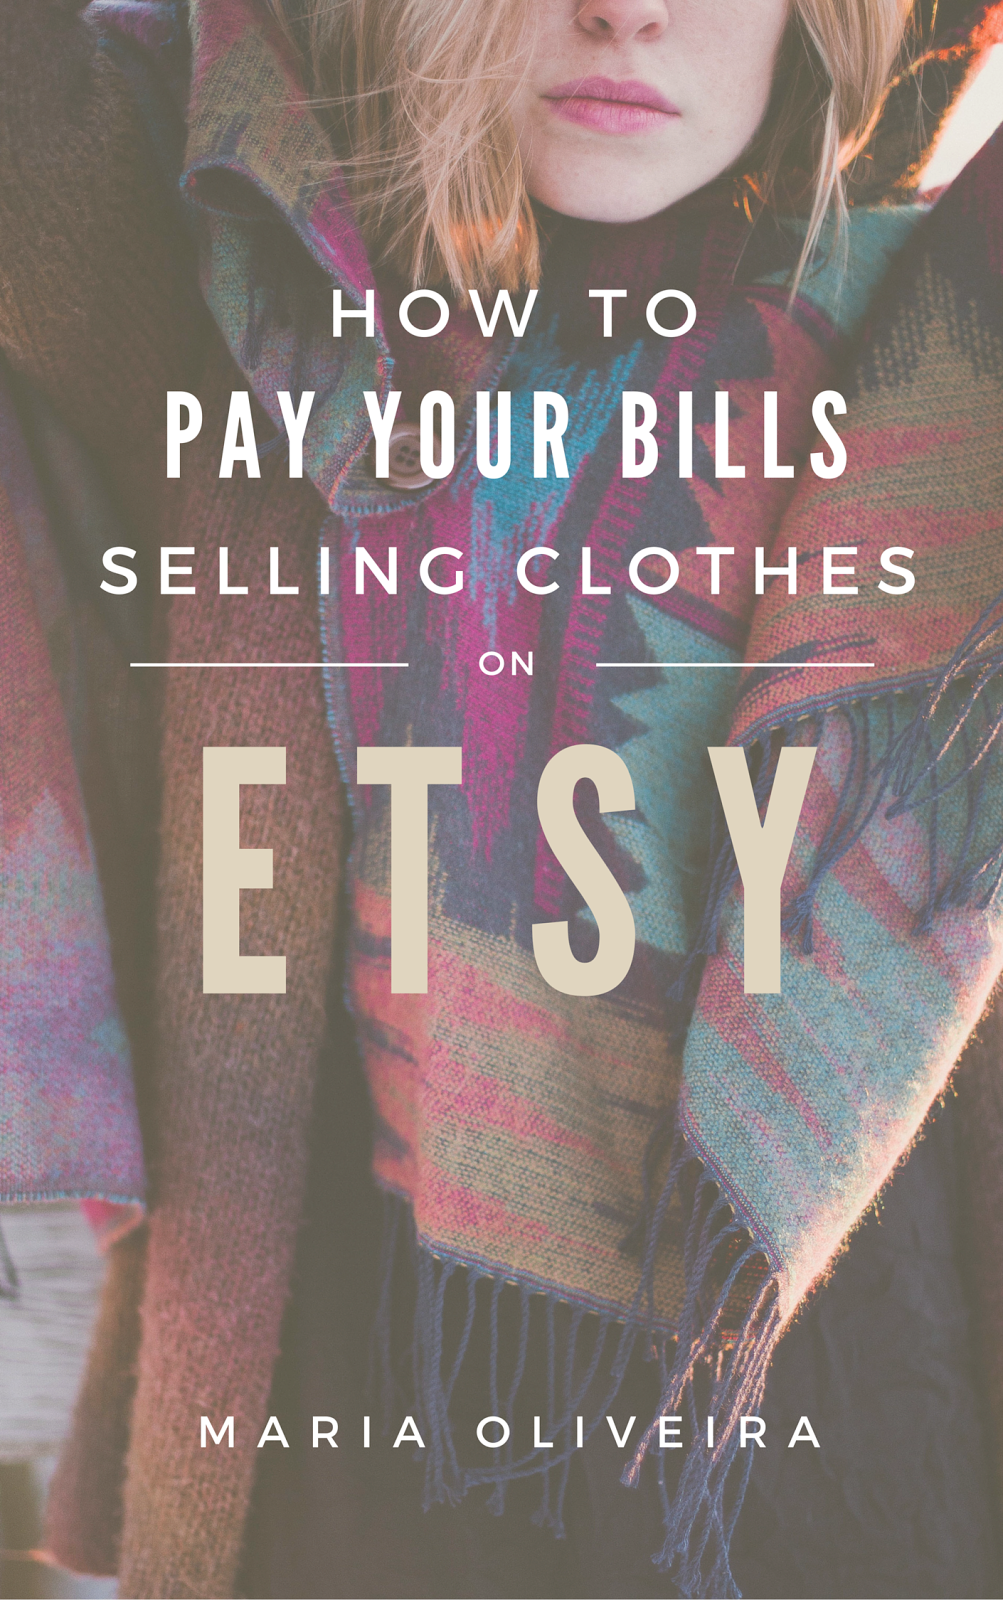 Want to sell on Etsy?